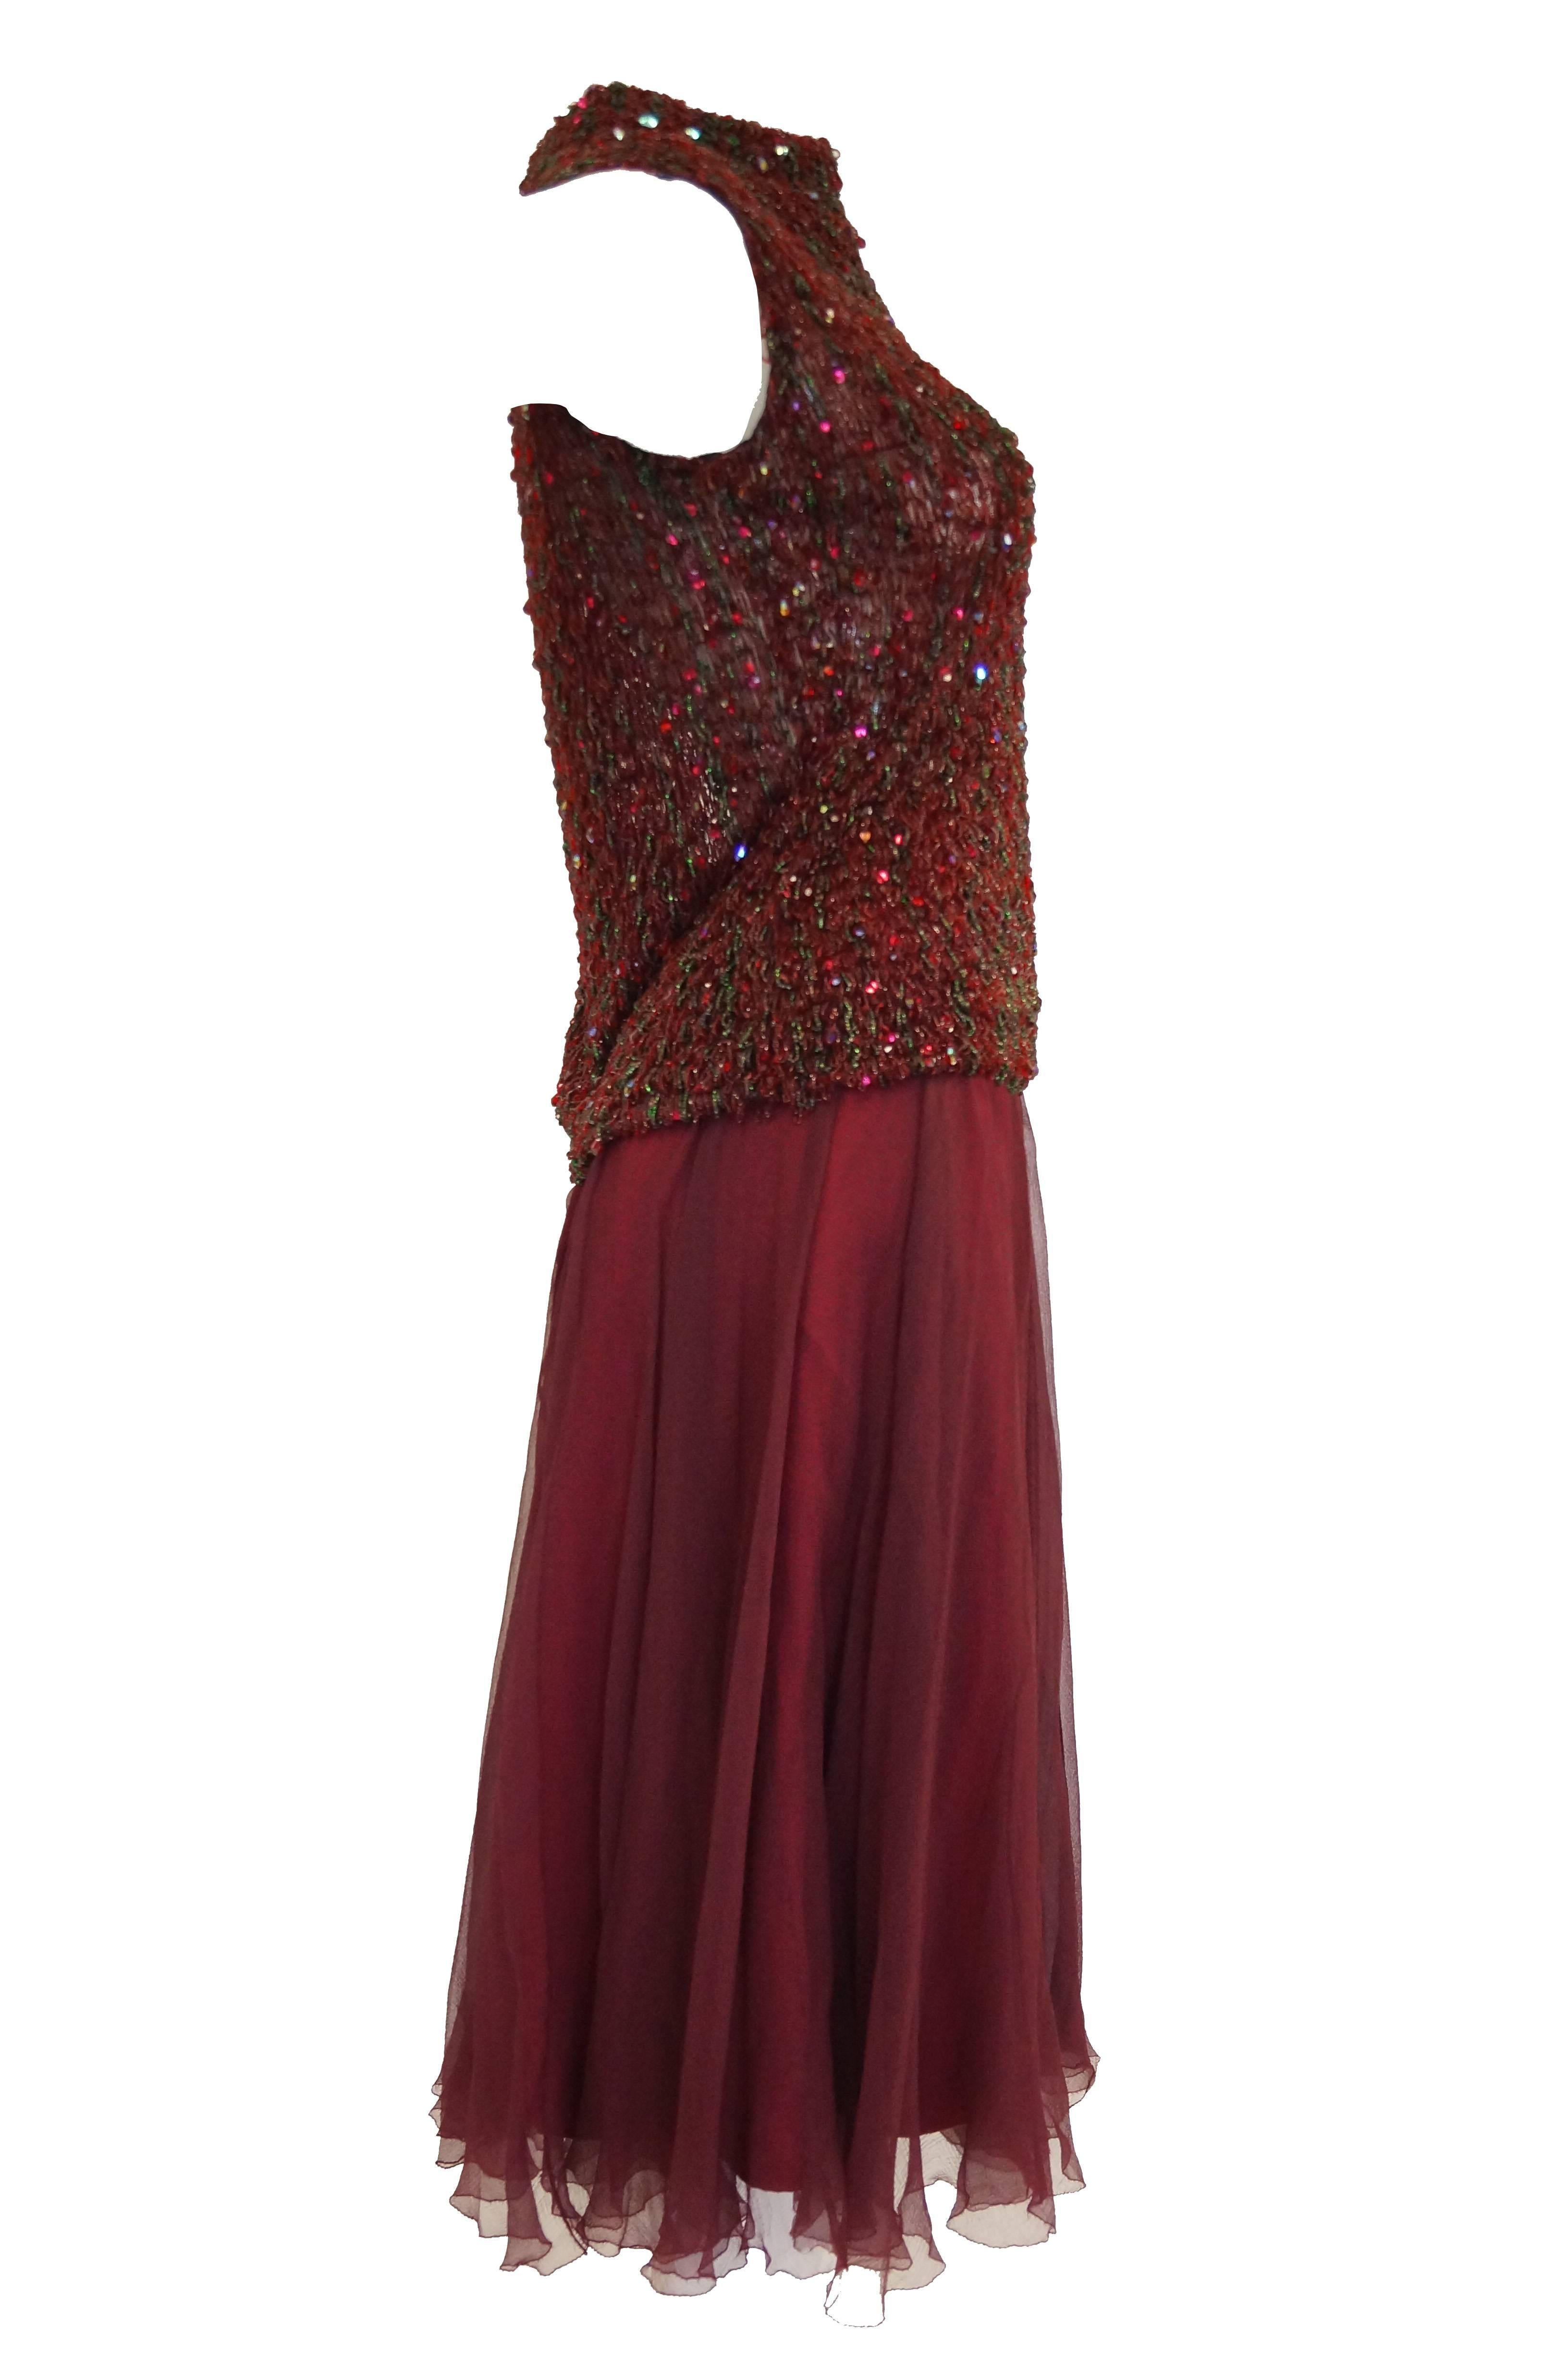 Yves Saint Laurent Couture Evening Dress Owned by Claudette Colbert, 1963  For Sale 2